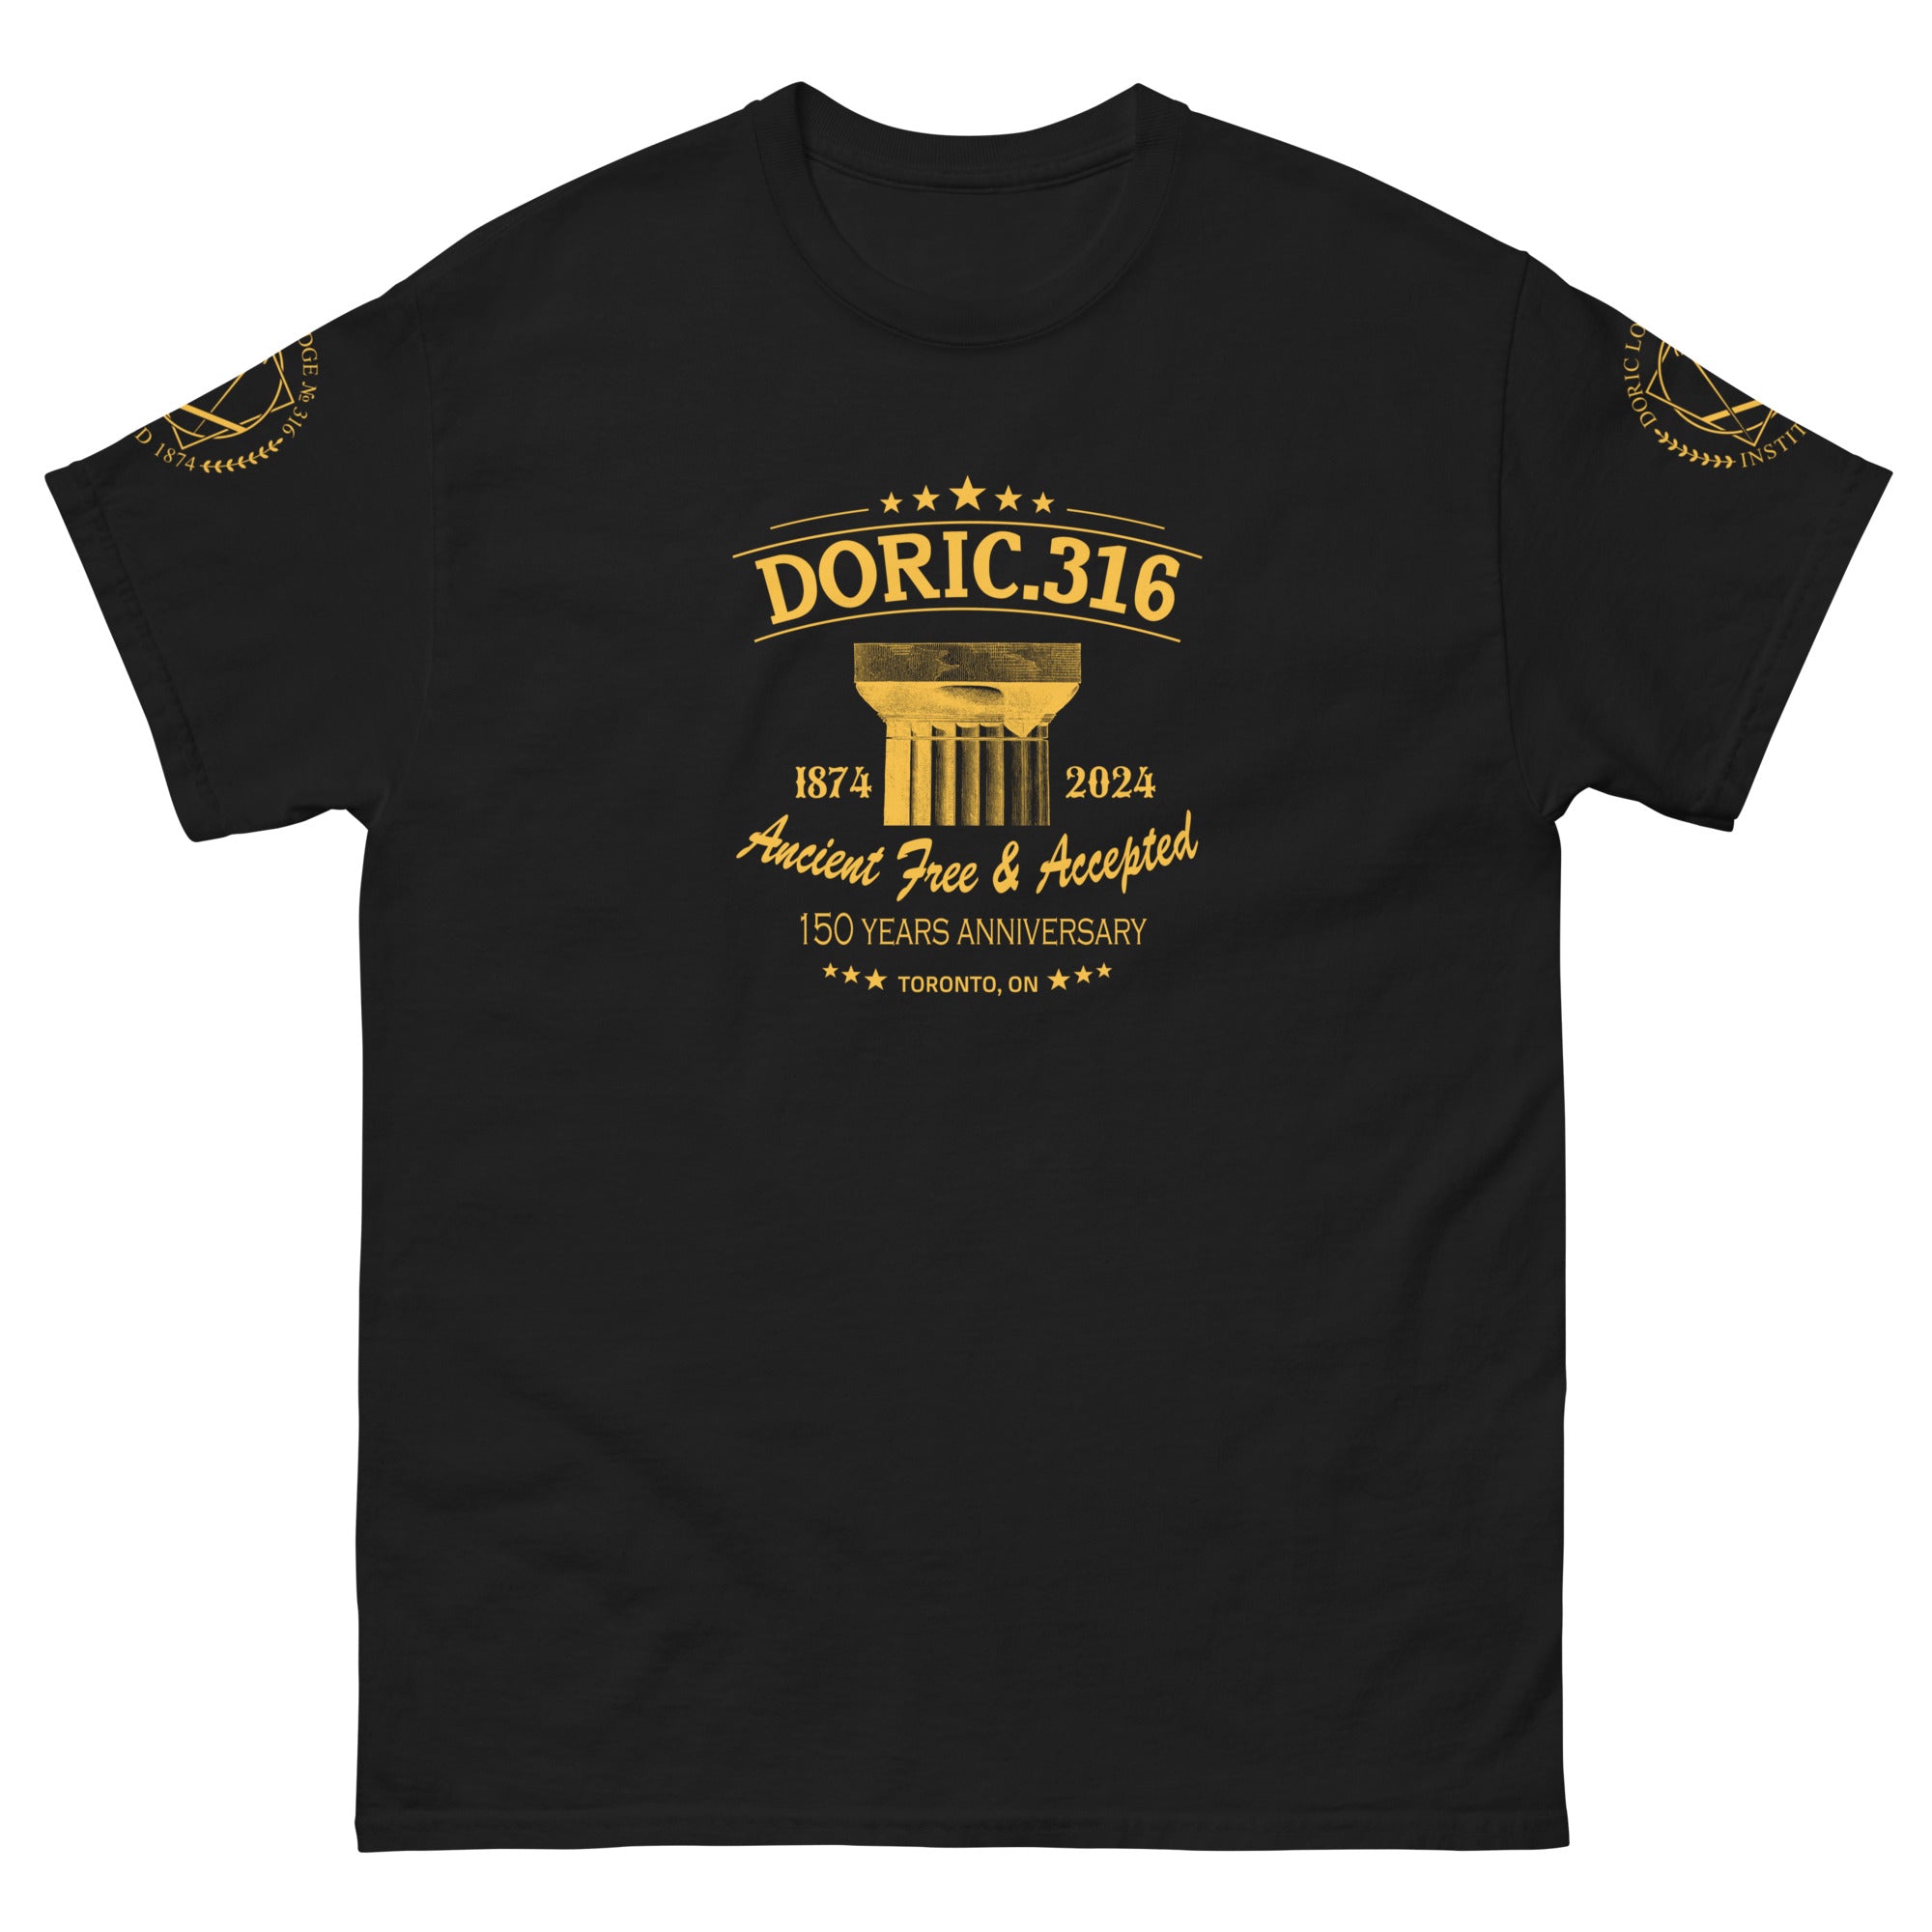 Doric 316 150th Anniversary T-shirt 4 SIDES PRINT (FRONT, BACK, SLEEVES)